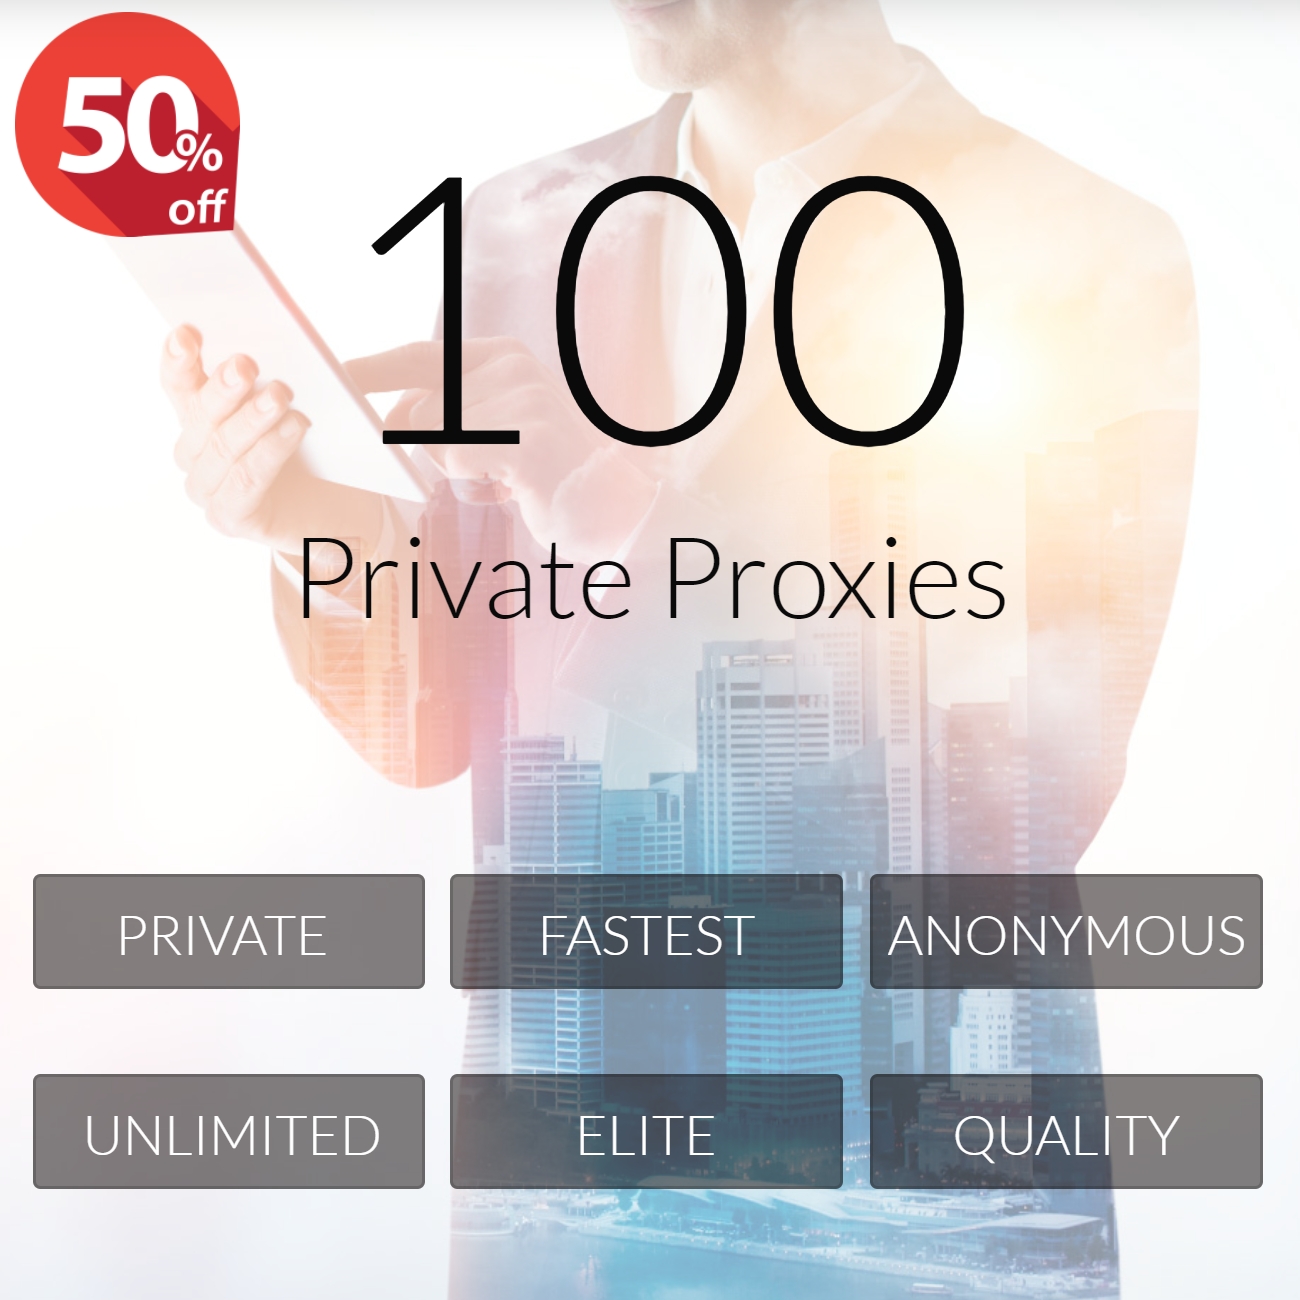 extraproxies 100 private proxies